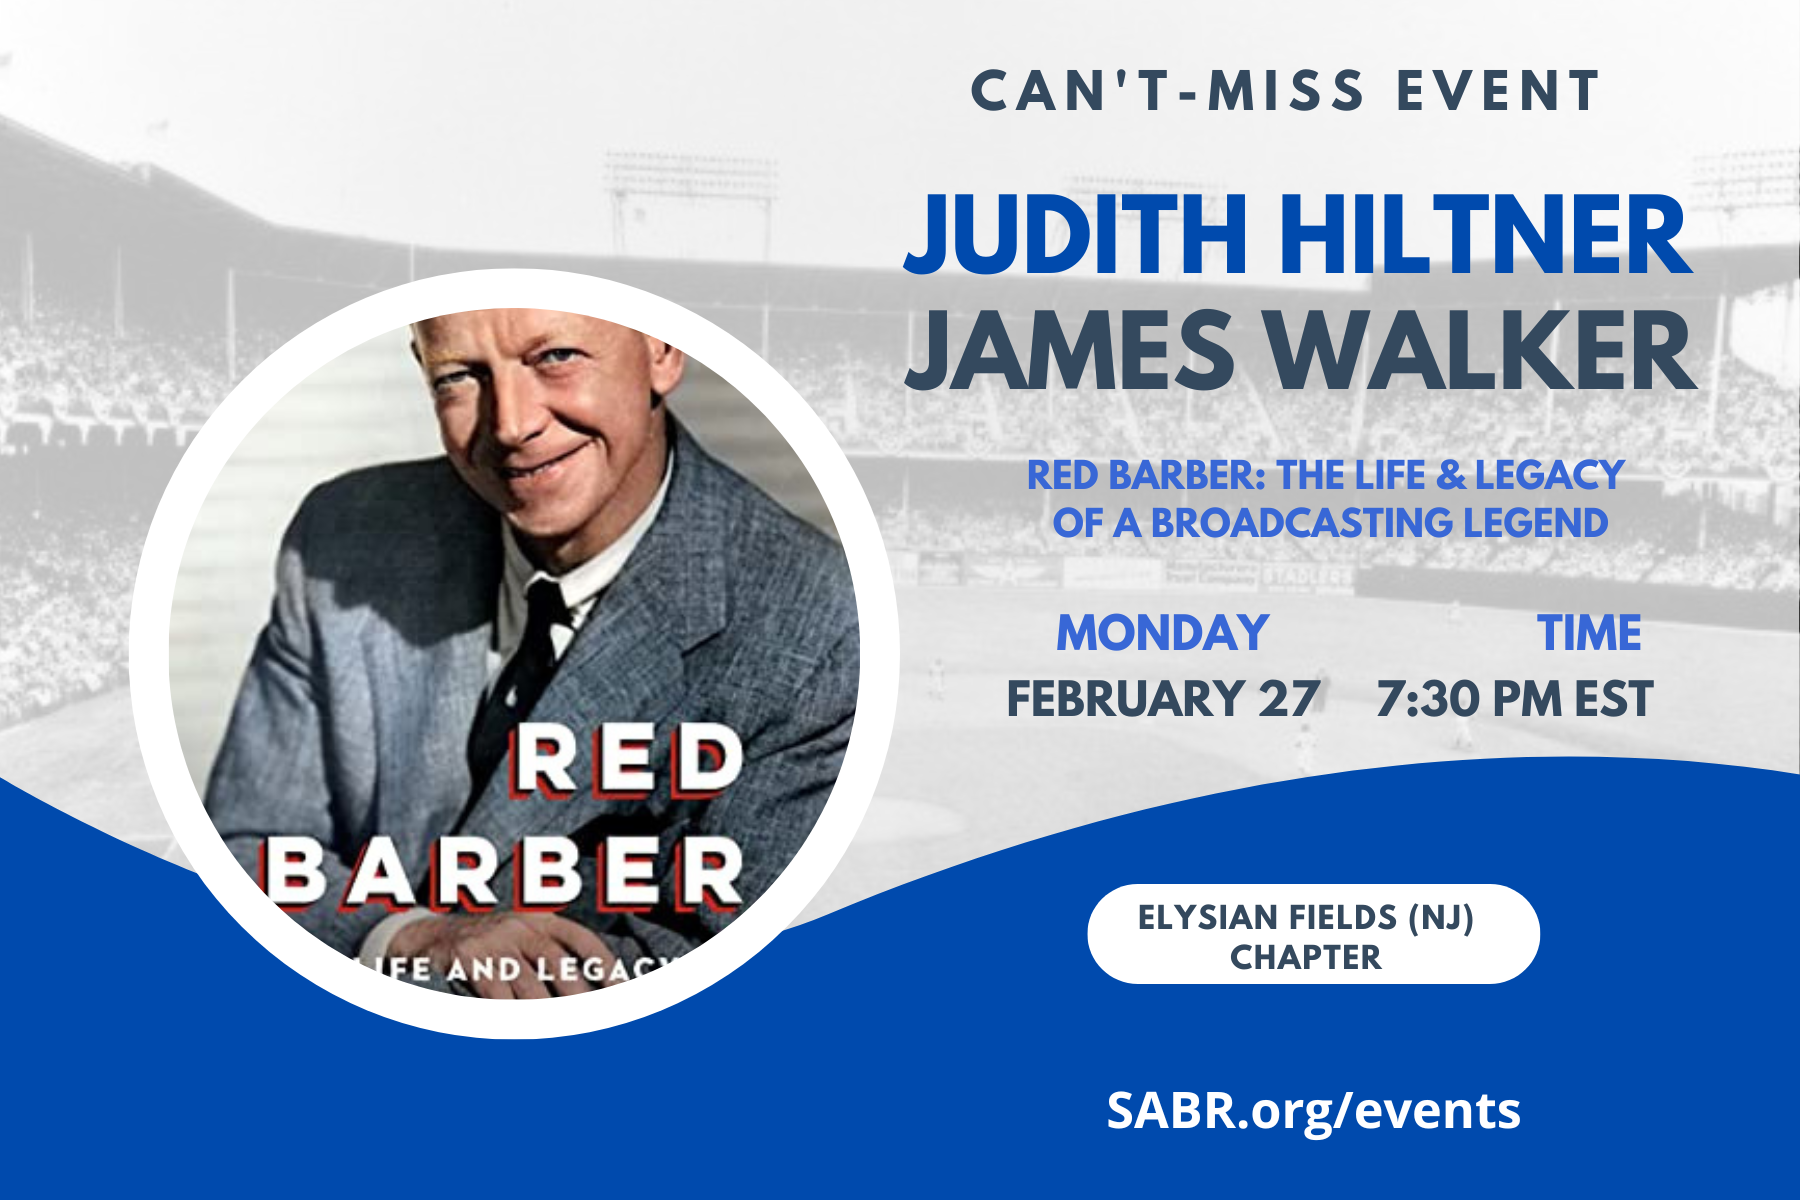 SABR’s Elysian Fields Chapter in Northern New Jersey will have its next Zoom chapter meeting on Monday, February 27 at 7:30-8:30 p.m. ET.   Our guest speakers are Judith R. Hiltner and James R. Walker, authors of Red Barber: The Life and Legacy of a Broadcasting Legend.  SABR members wishing to receive the Zoom access information should email david@davidkrell.com.